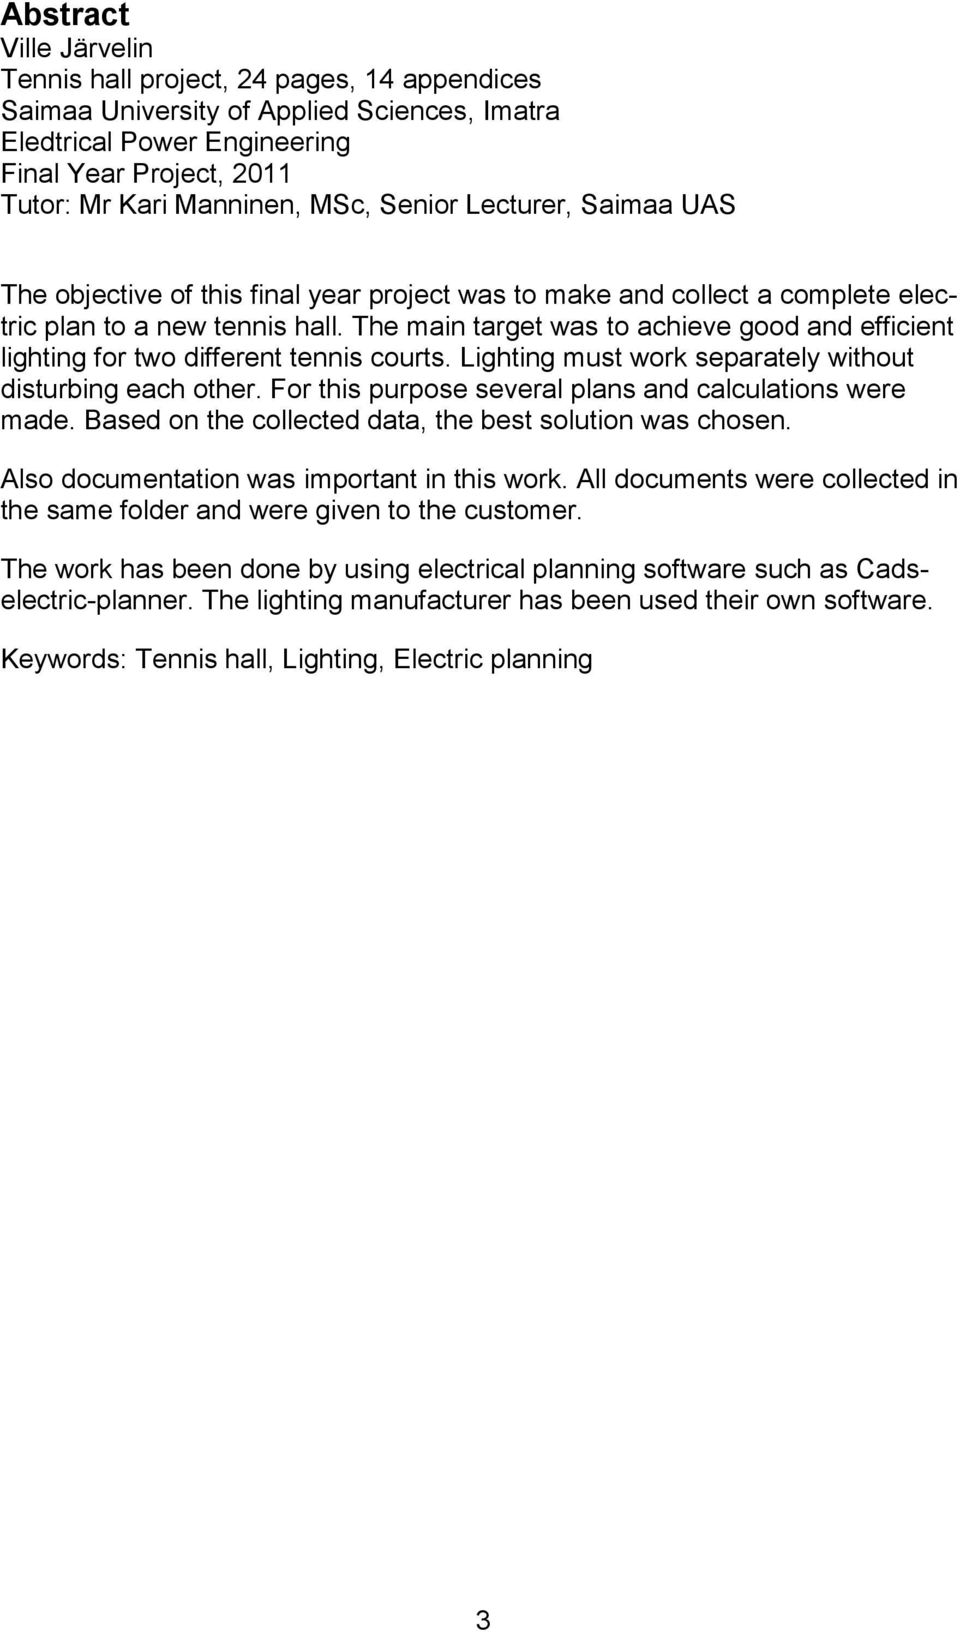 The main target was to achieve good and efficient lighting for two different tennis courts. Lighting must work separately without disturbing each other.